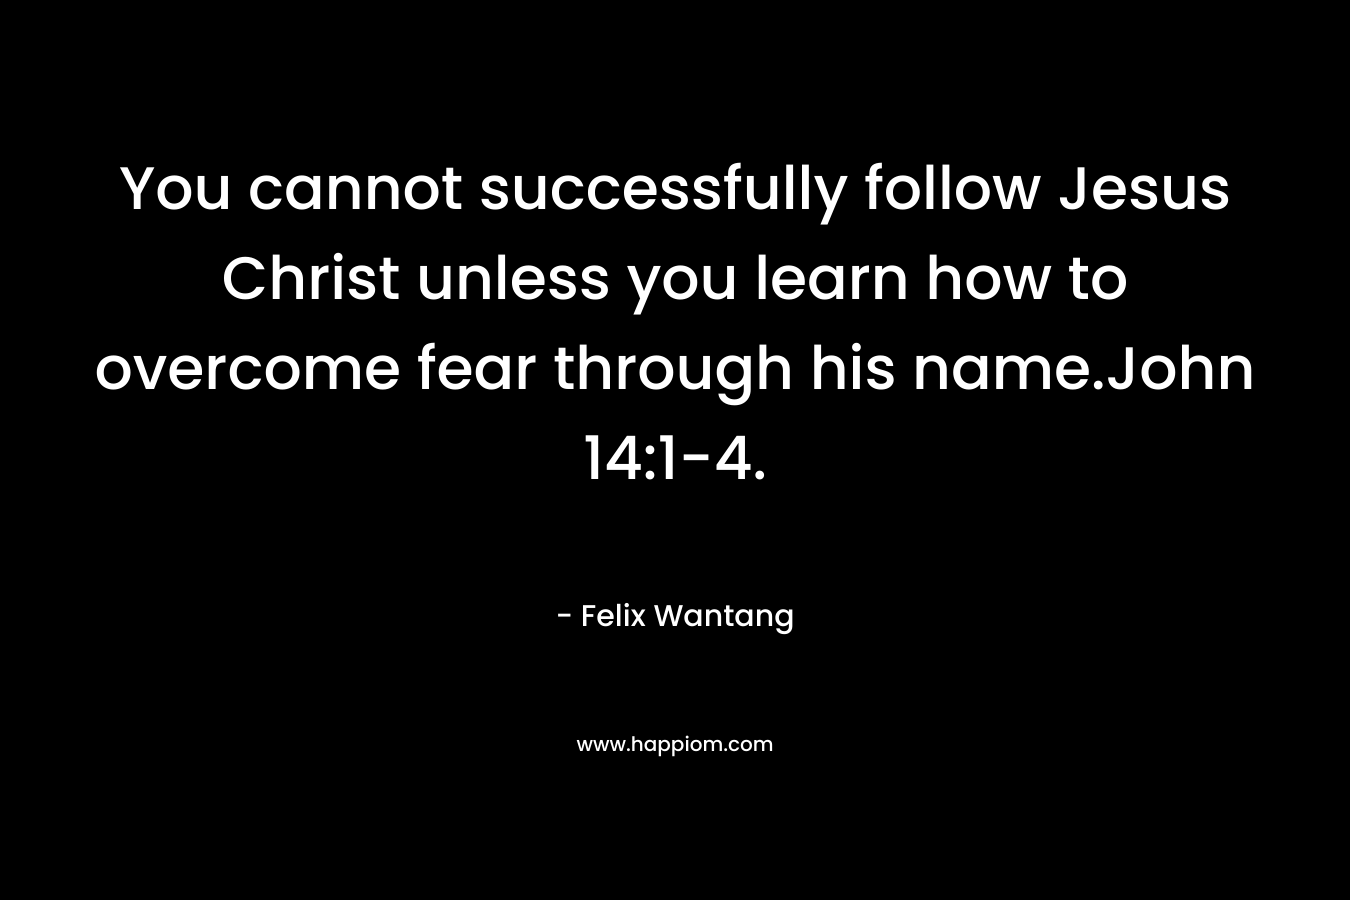 You cannot successfully follow Jesus Christ unless you learn how to overcome fear through his name.John 14:1-4. – Felix Wantang